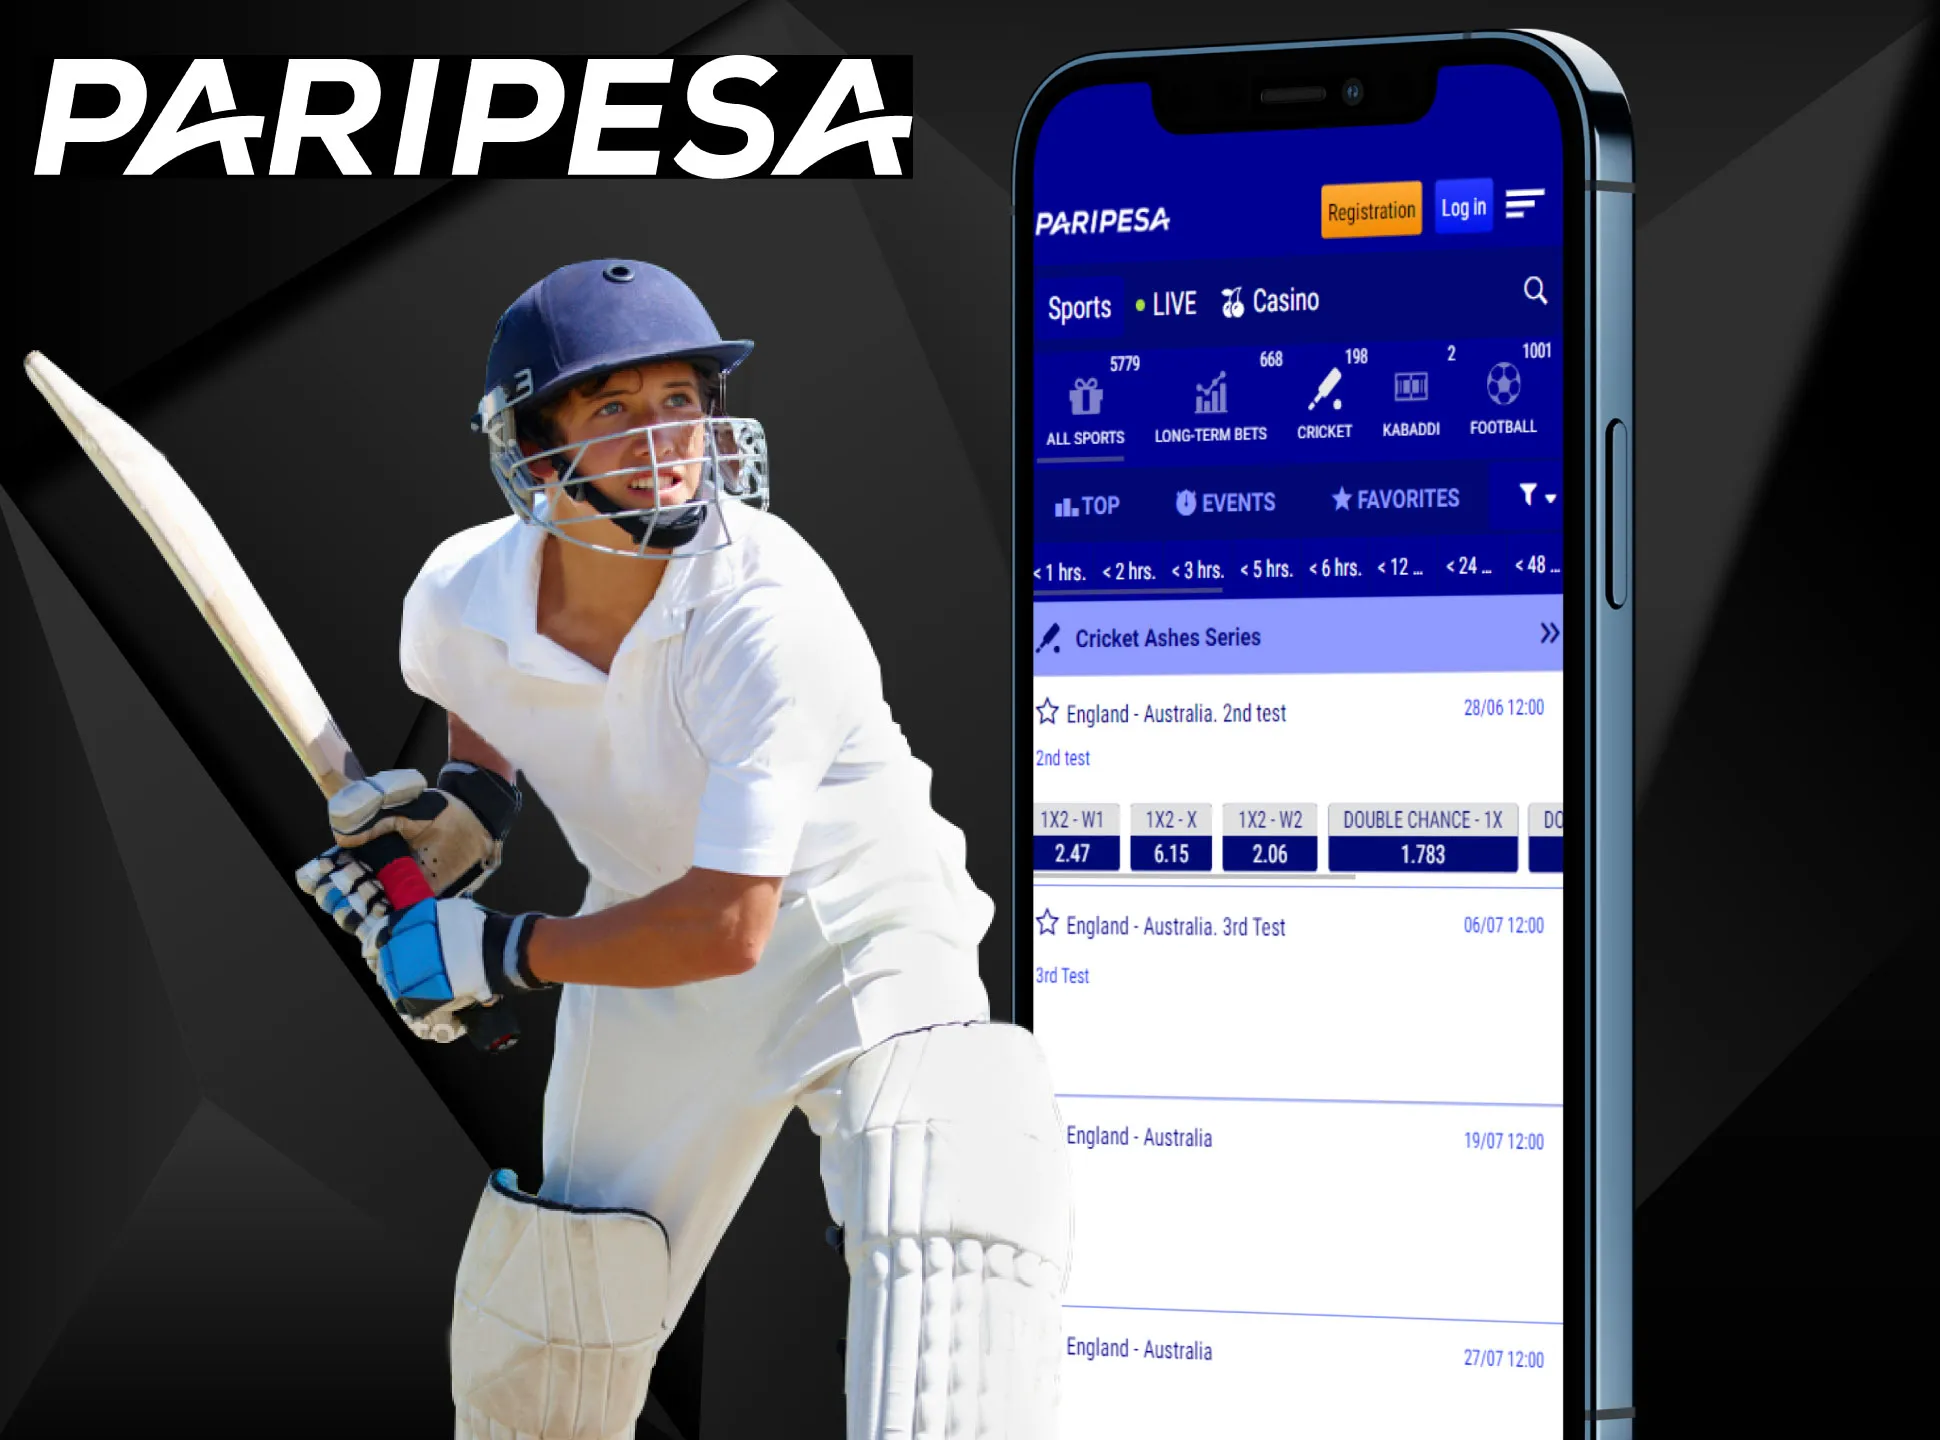 Use the Paripesa app to bet on real money.